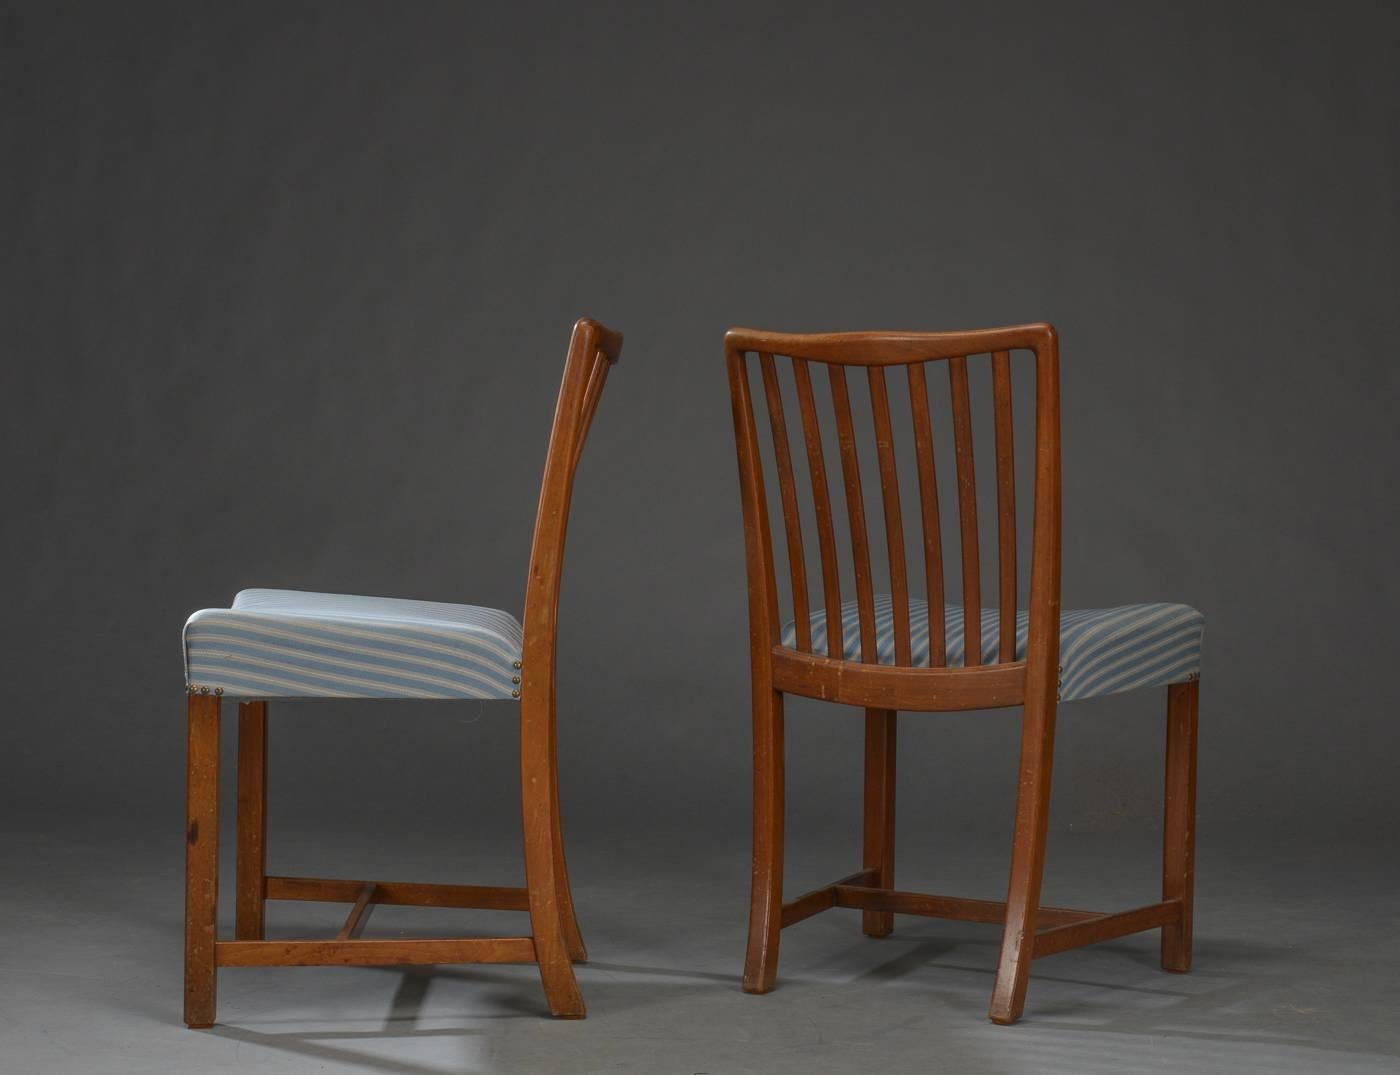 Six chairs made by Sondergaard Mobler in Denmark in the late 1940s.
The frame is made of Cuban mahogany, seat upholstered in striped fabric. 
Origianl condition, resoration on request.

H. 47/87, B. 50 cm. Normal traces of wear. wear, some